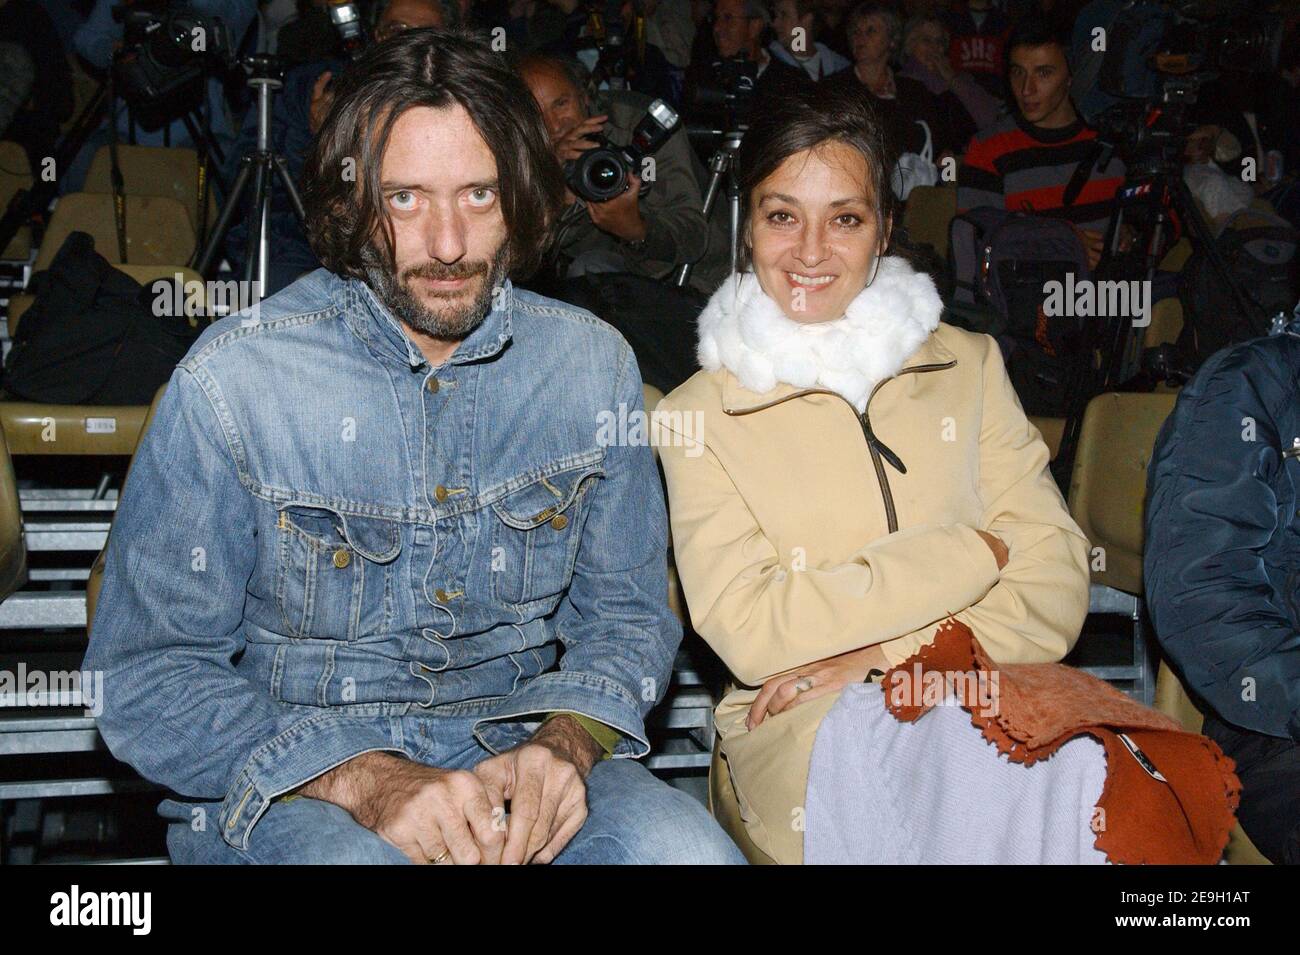 Singers and composers Fred Chichin and Catherine Ringer of 'Rita Mitsouko'  attend Les Fetes de Nuit new show 'Les Noces de l'Enfant Roi' at the  Versailles castle on August 25, 2006. The